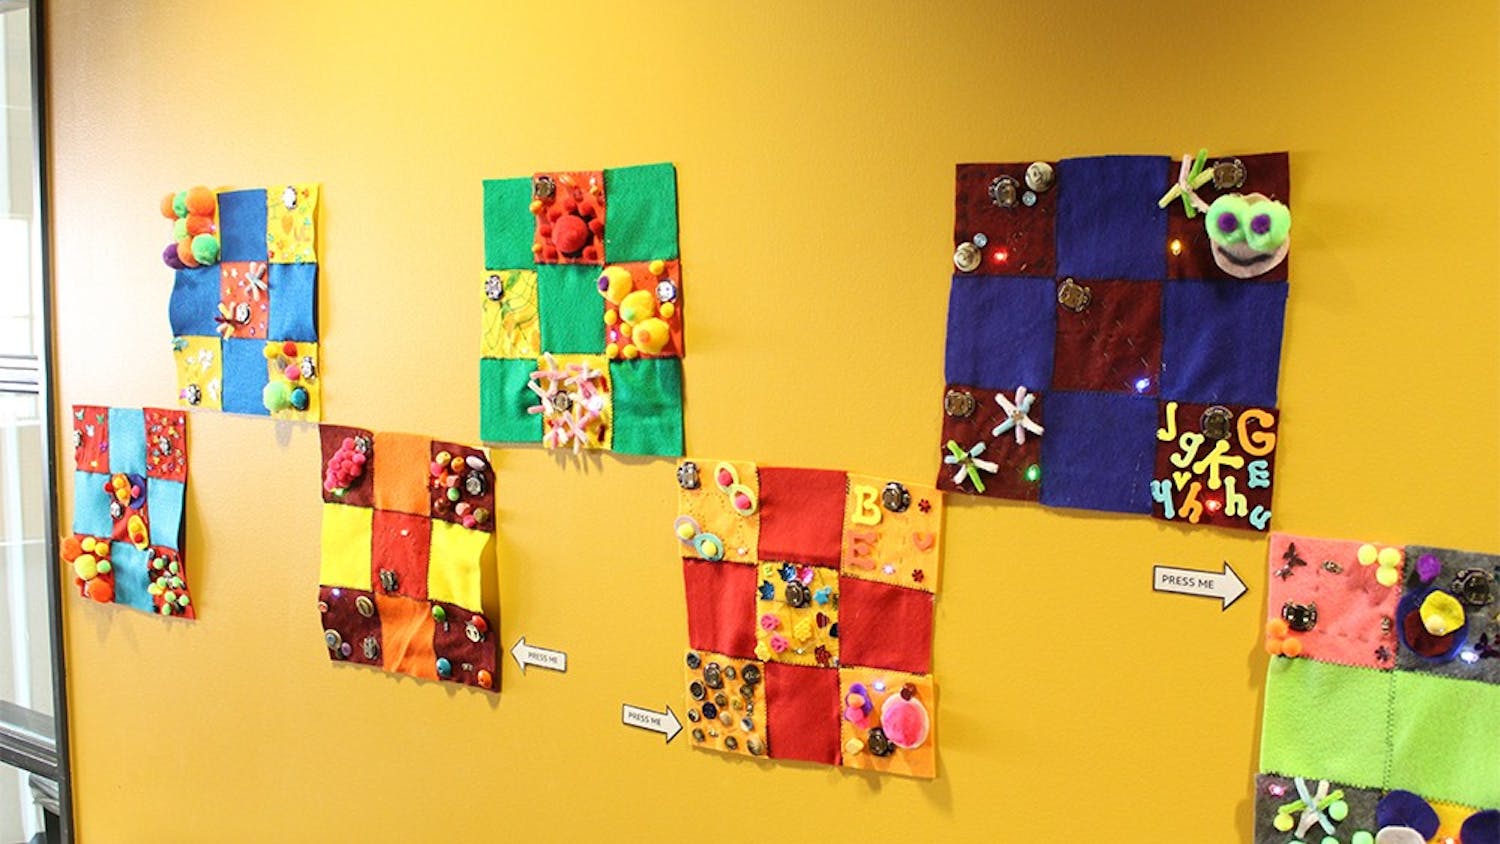 The E-Textile Community Quilt makers used fabric, conductive thread and lights to create their own patchwork pieces. They are on display in the WonderLab through March.